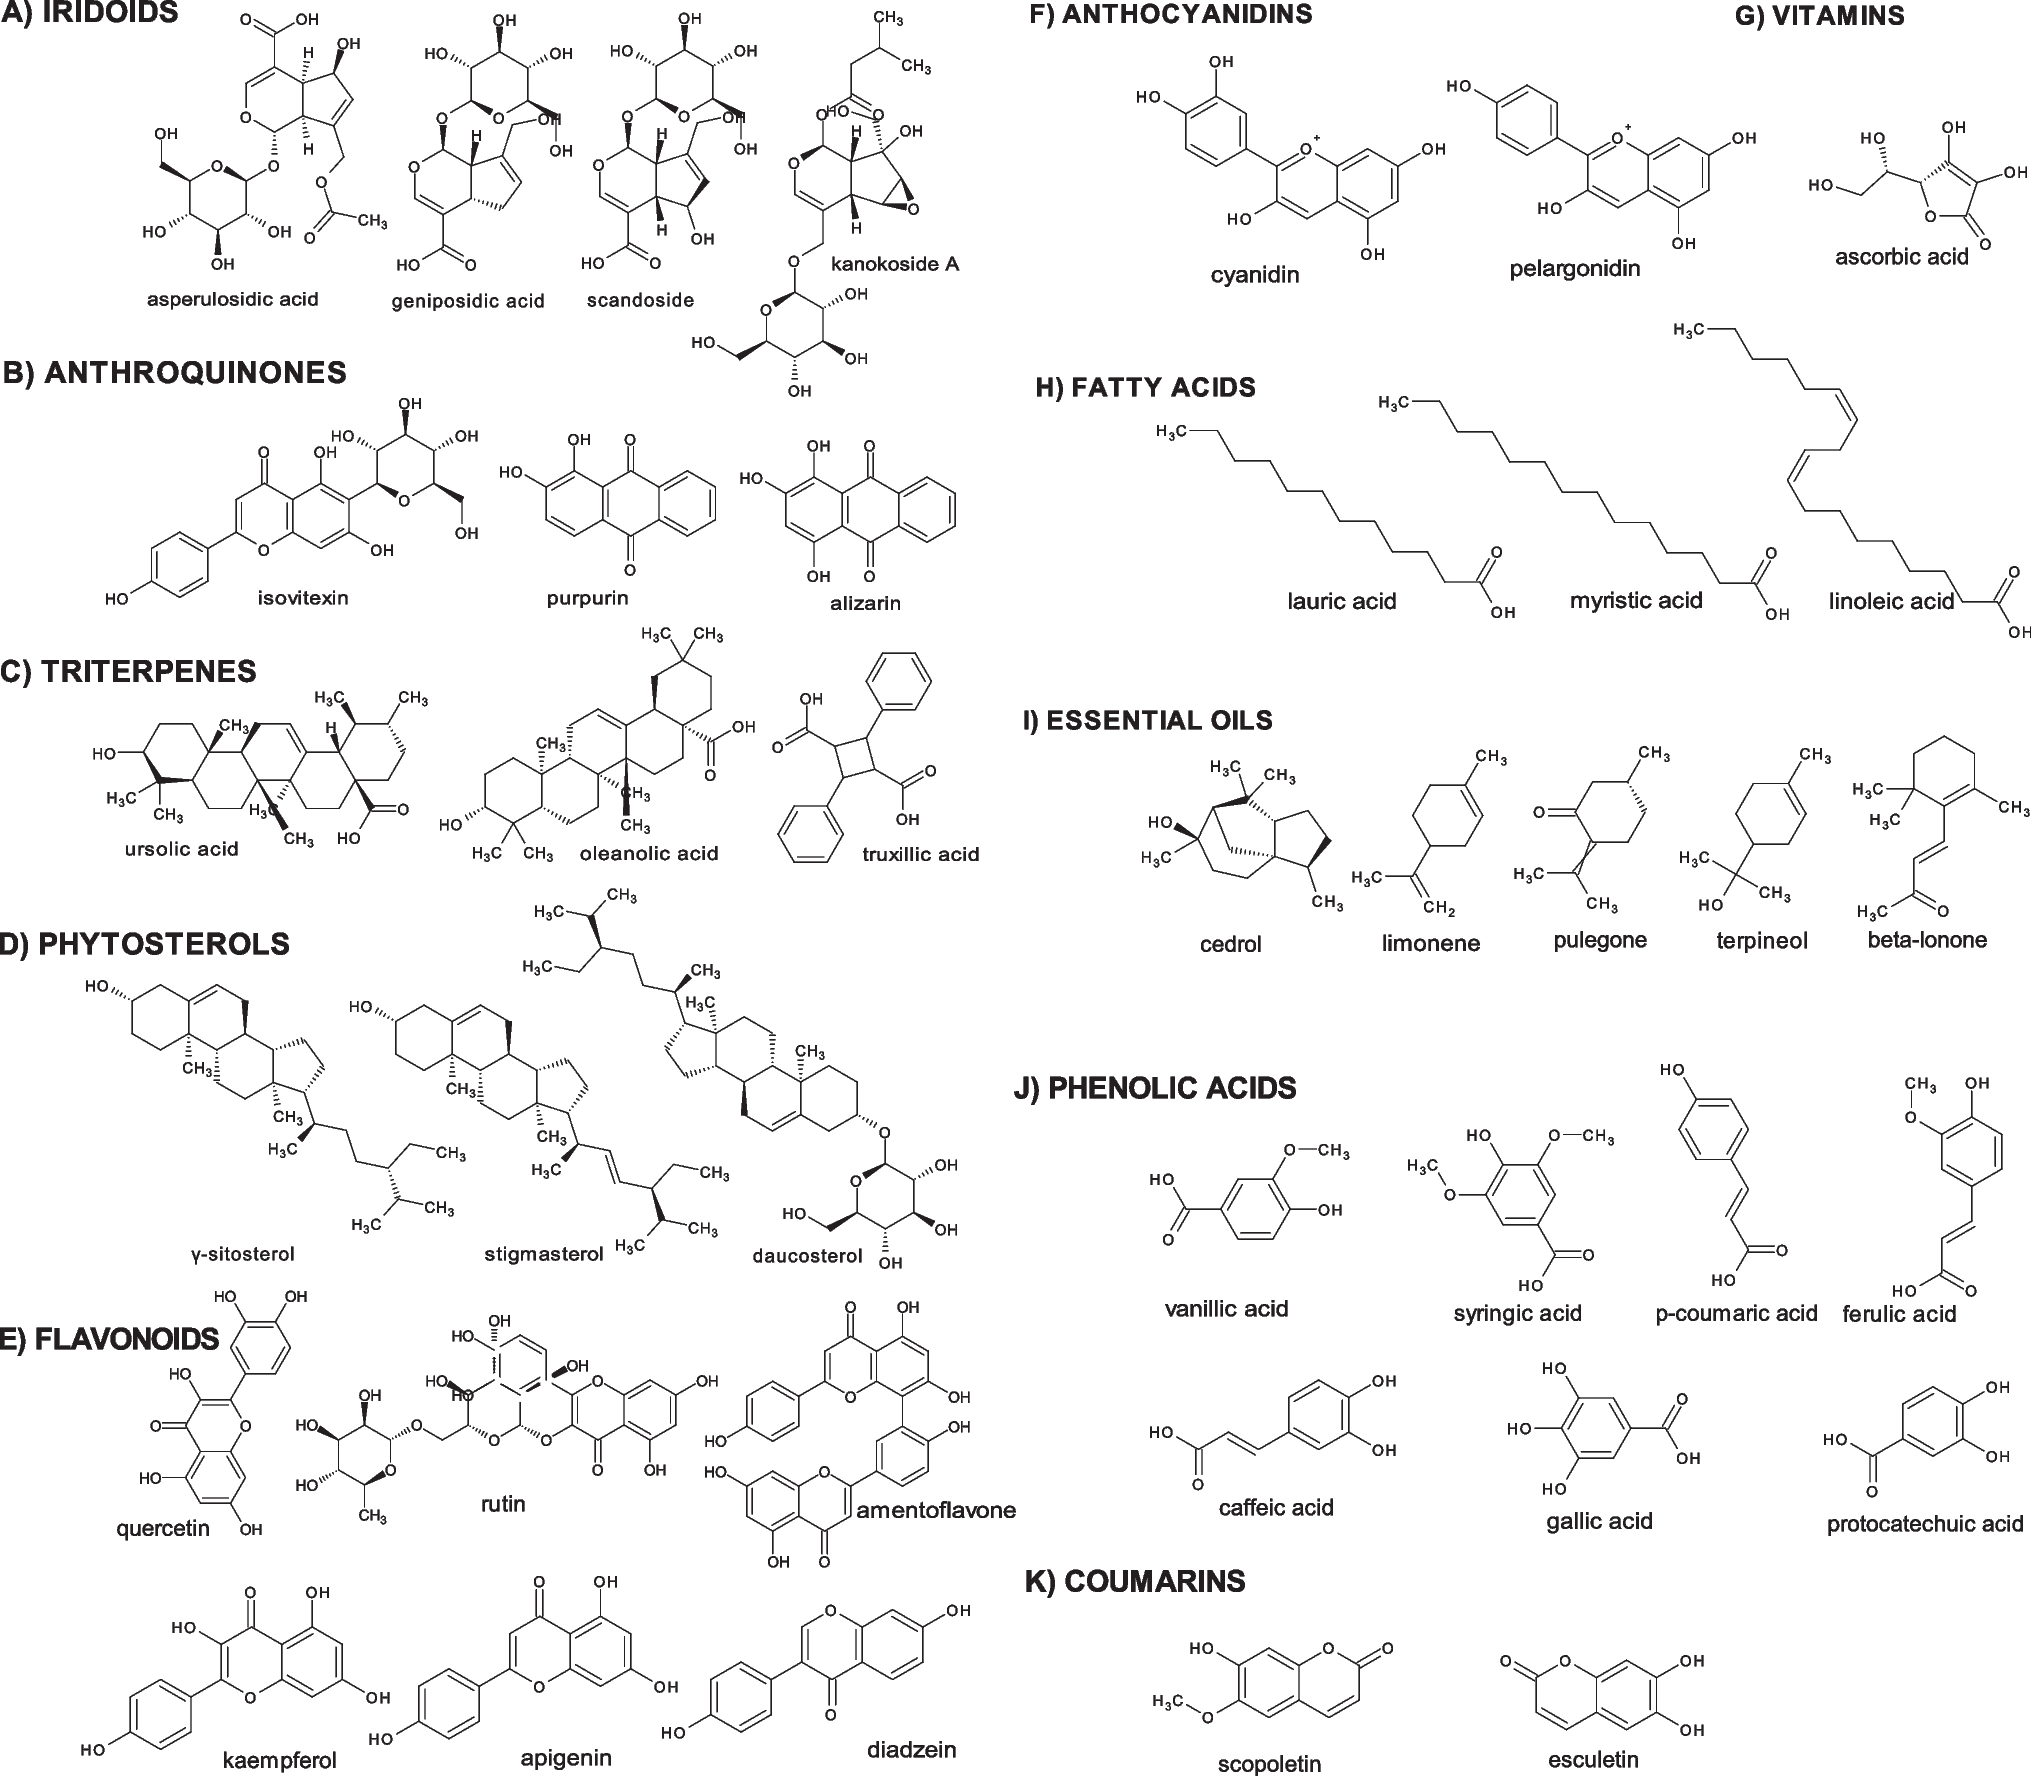 Phytochemistry, pharmacology, and medical uses of Oldenlandia (family Rubaceae): a review